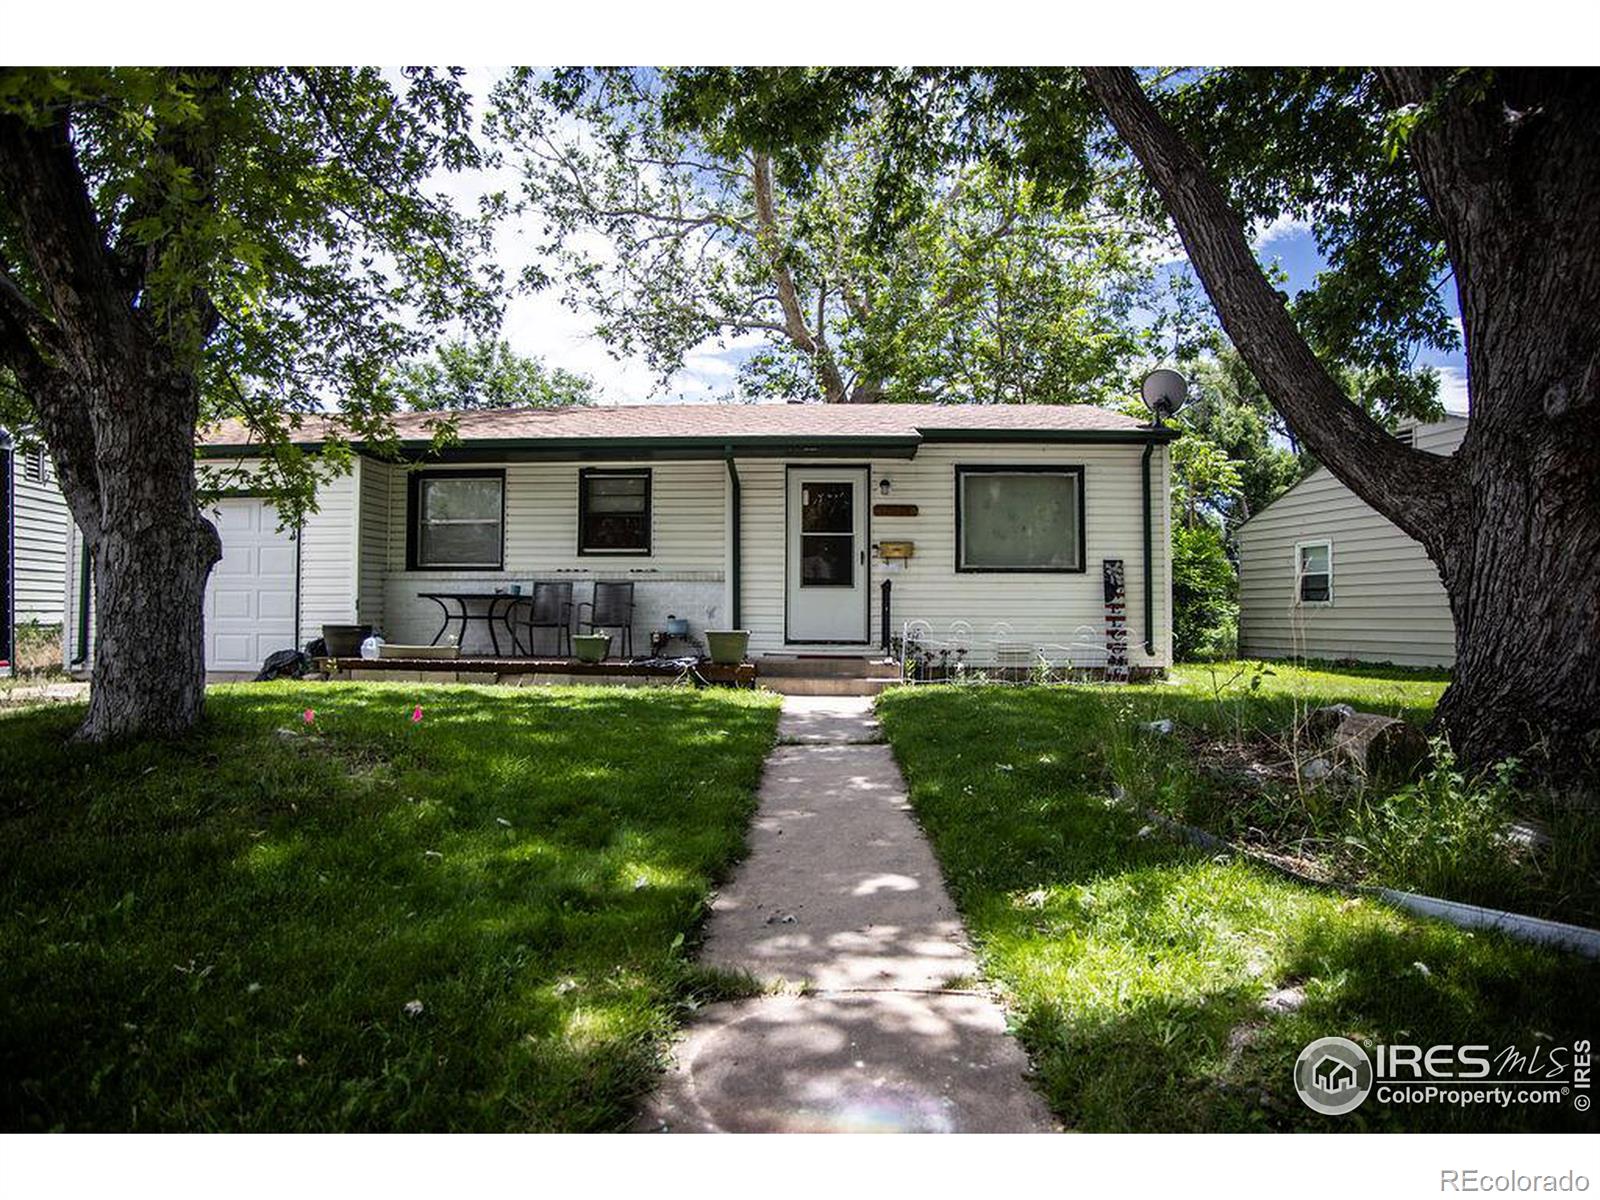 2412  15th Avenue, greeley MLS: 4567891012431 Beds: 2 Baths: 1 Price: $300,000